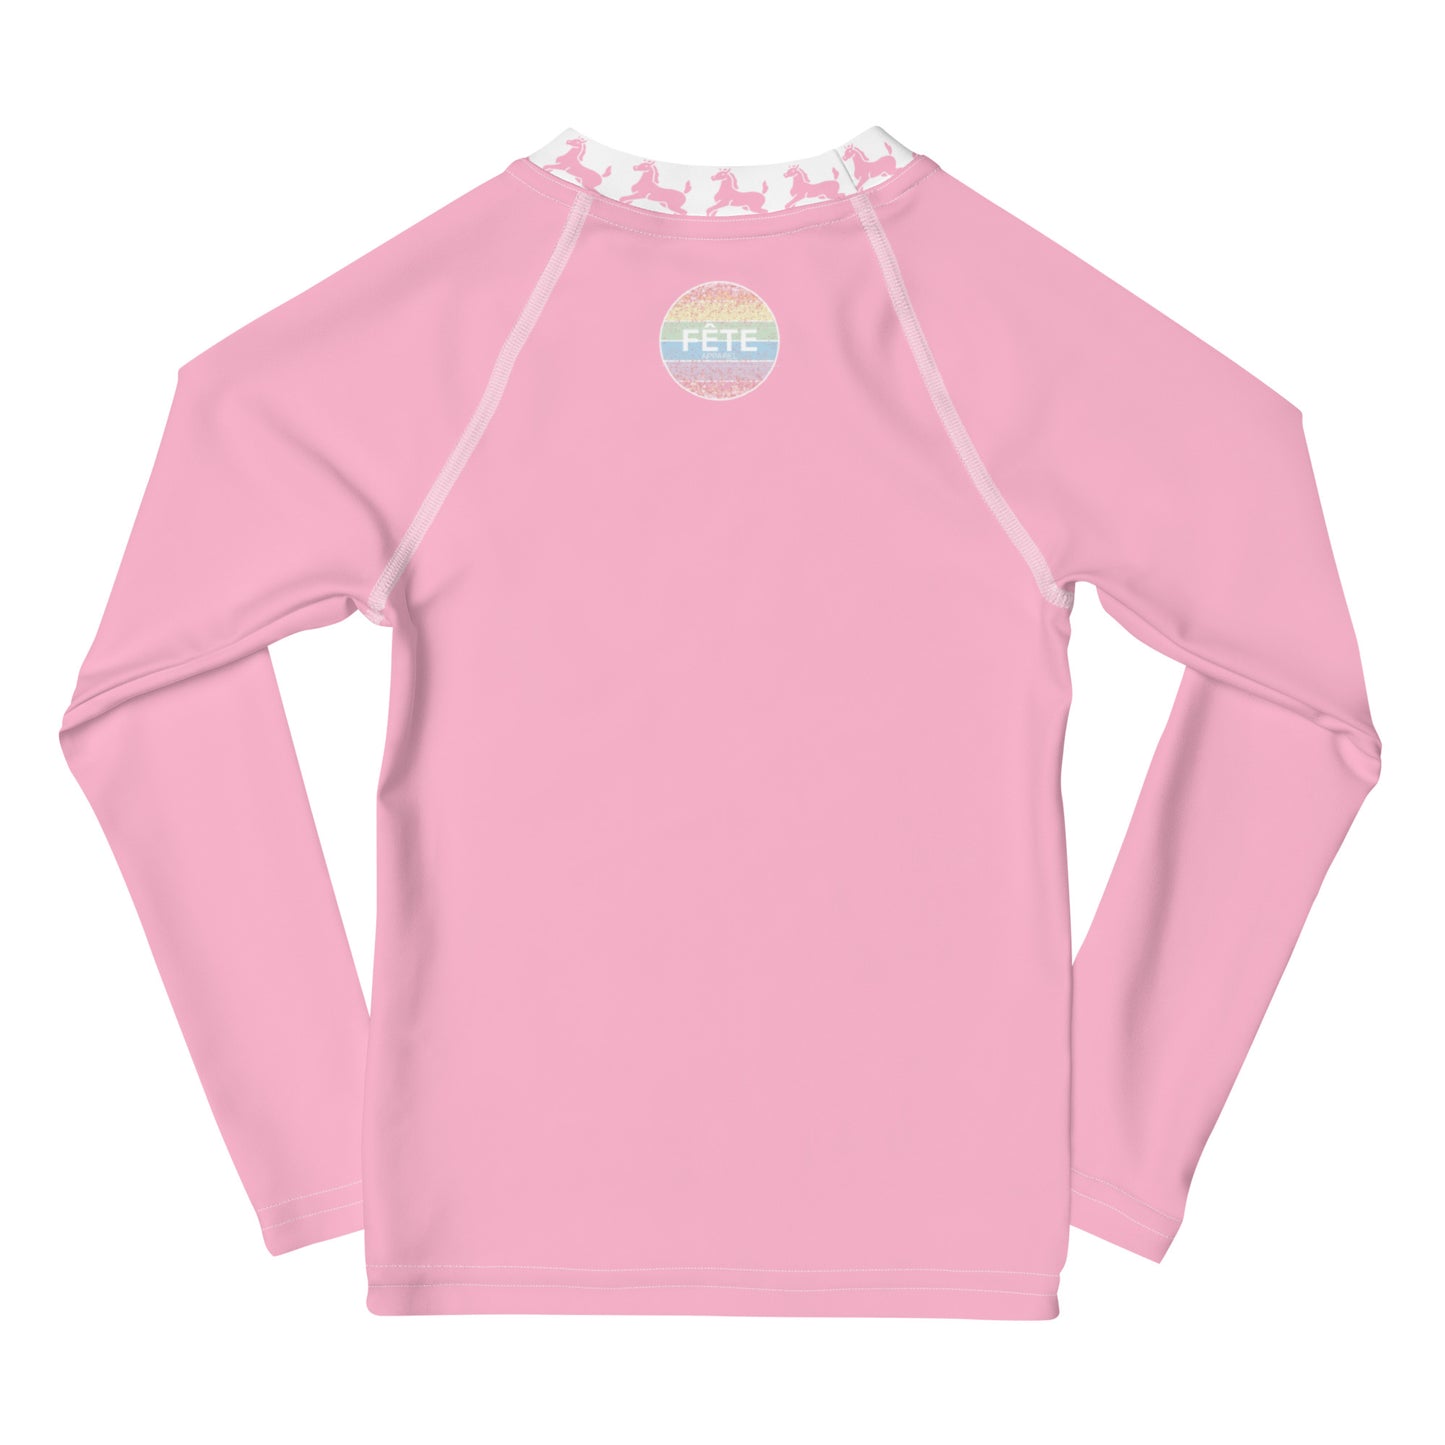 Children's Long-Sleeved Sun Shirt Equestrian in Cotton Candy